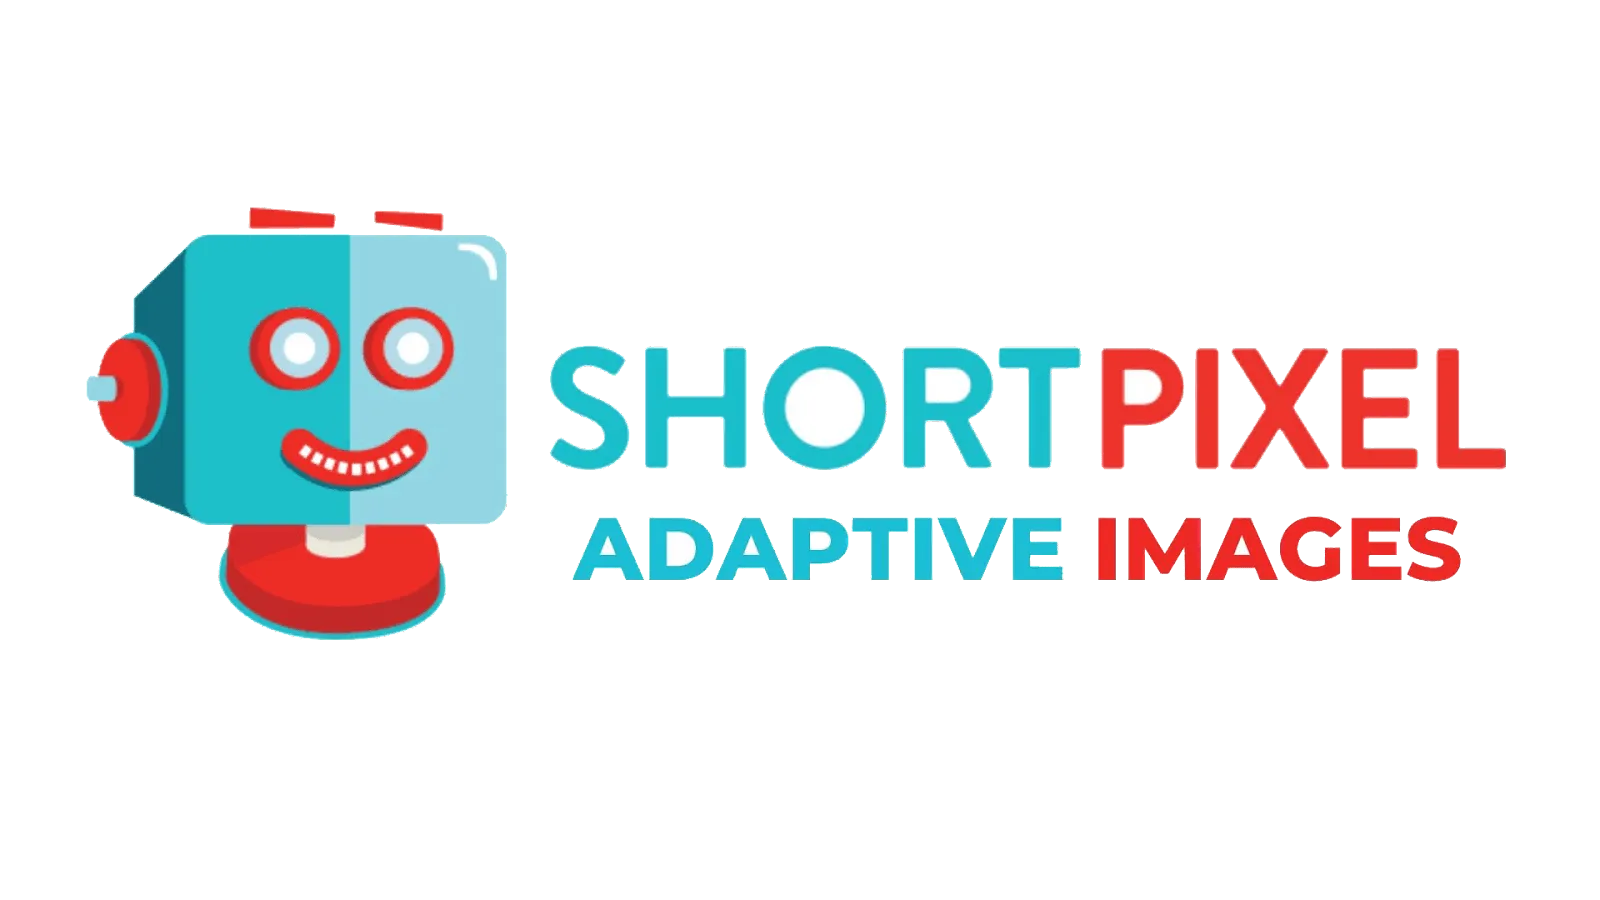 ShortPixel Adaptive Images - Products, Competitors, Financials, Employees, Headquarters Locations